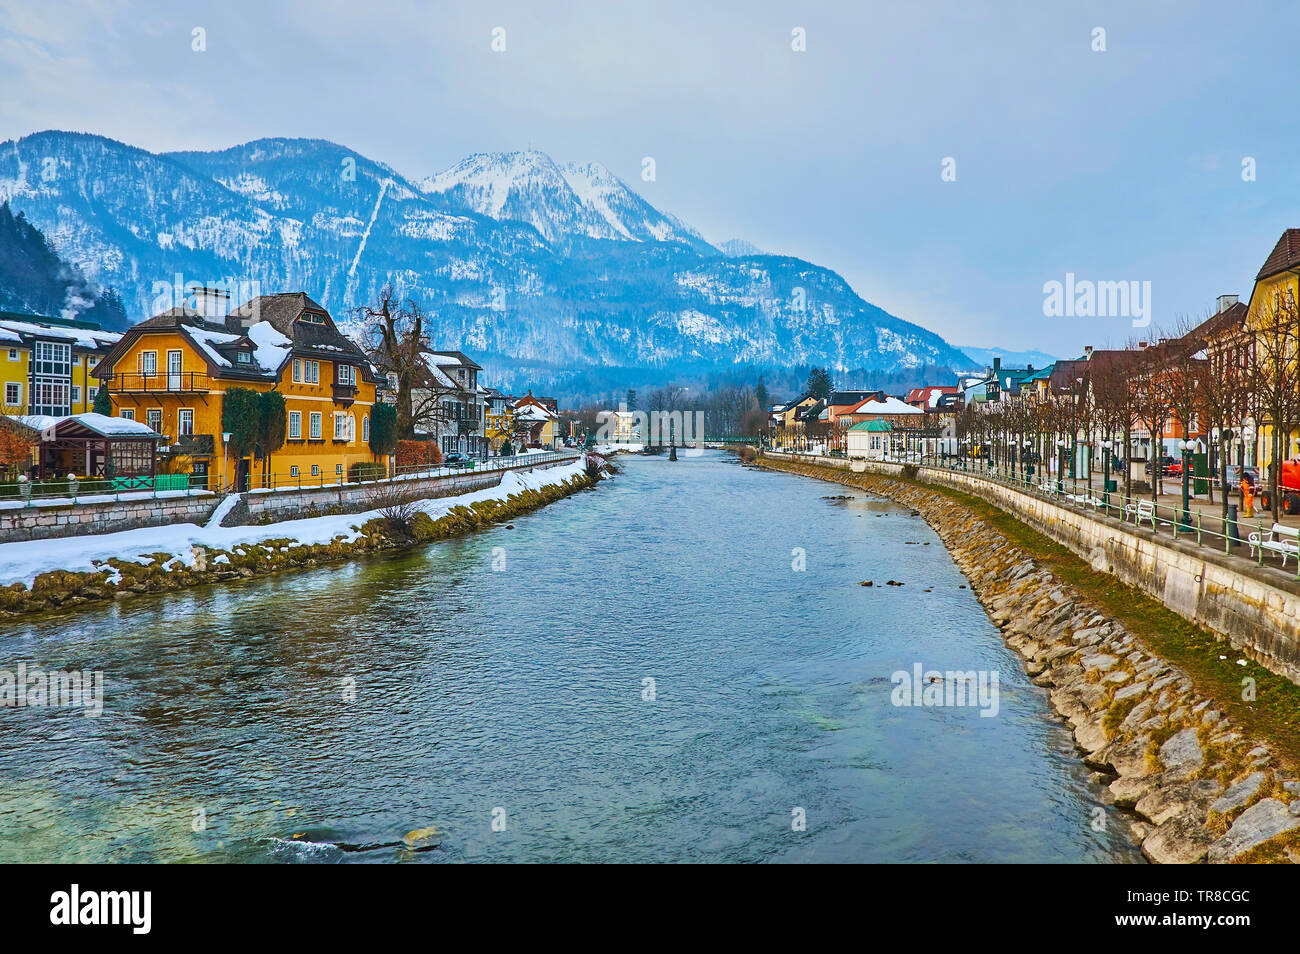 The picturesque Alpine scenery with snowy Mount Katrin from the Traun river, lined with histroical edifices of Bad Ischl, Salzkammergut, Austria. Stock Photo